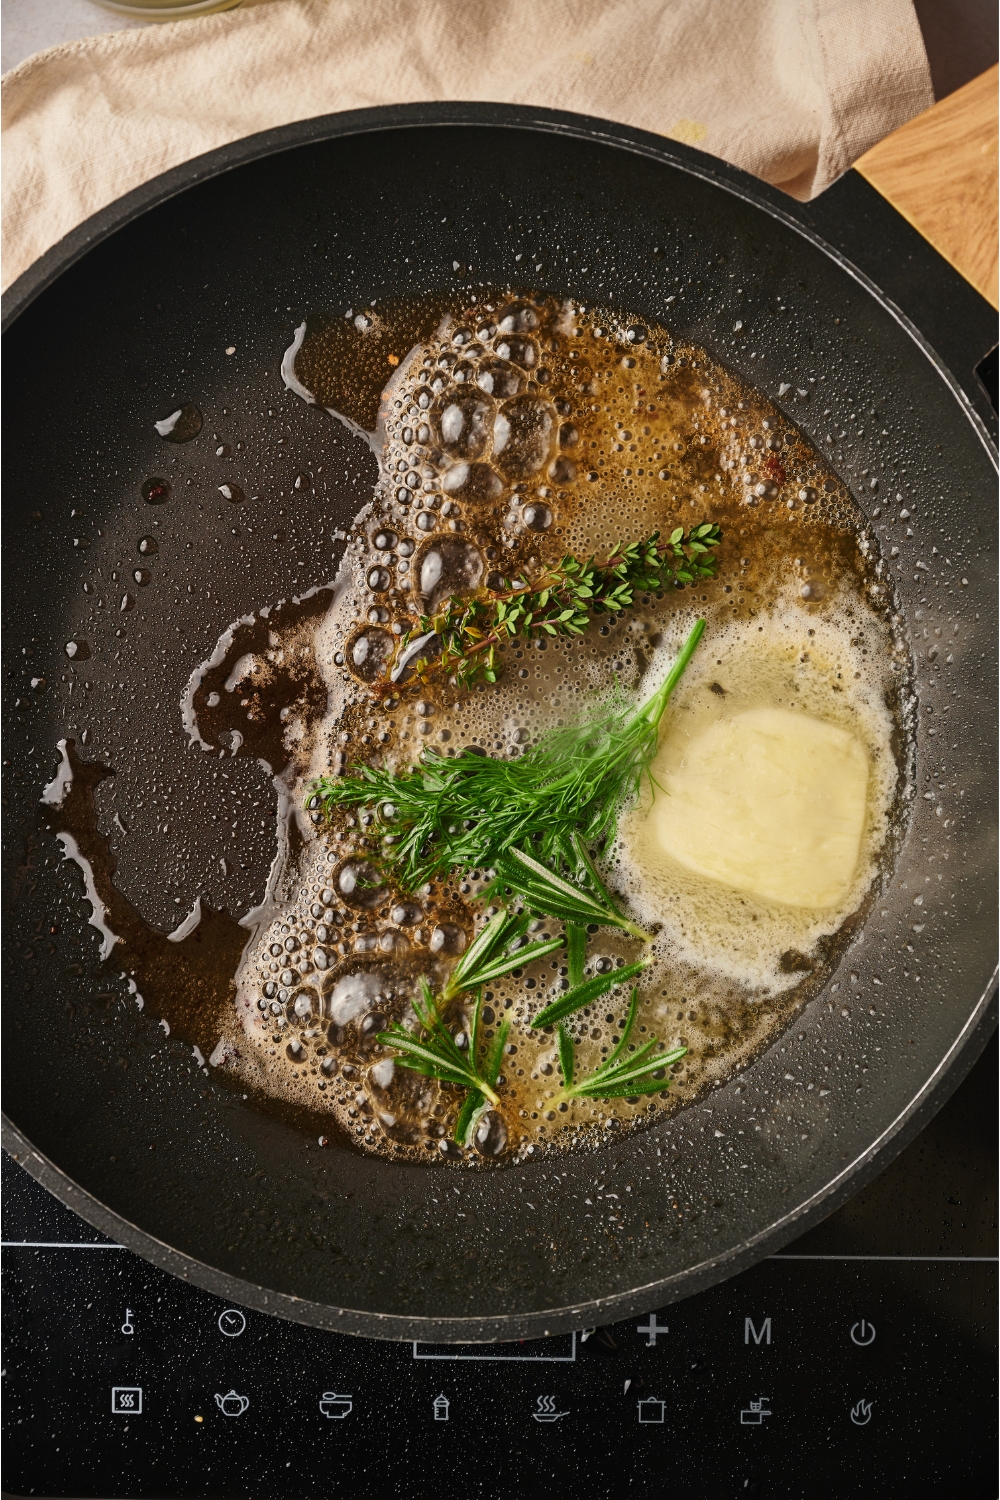 A black skillet with melting butter and fresh green herbs in it. The butter is bubbling and almost completely melted.